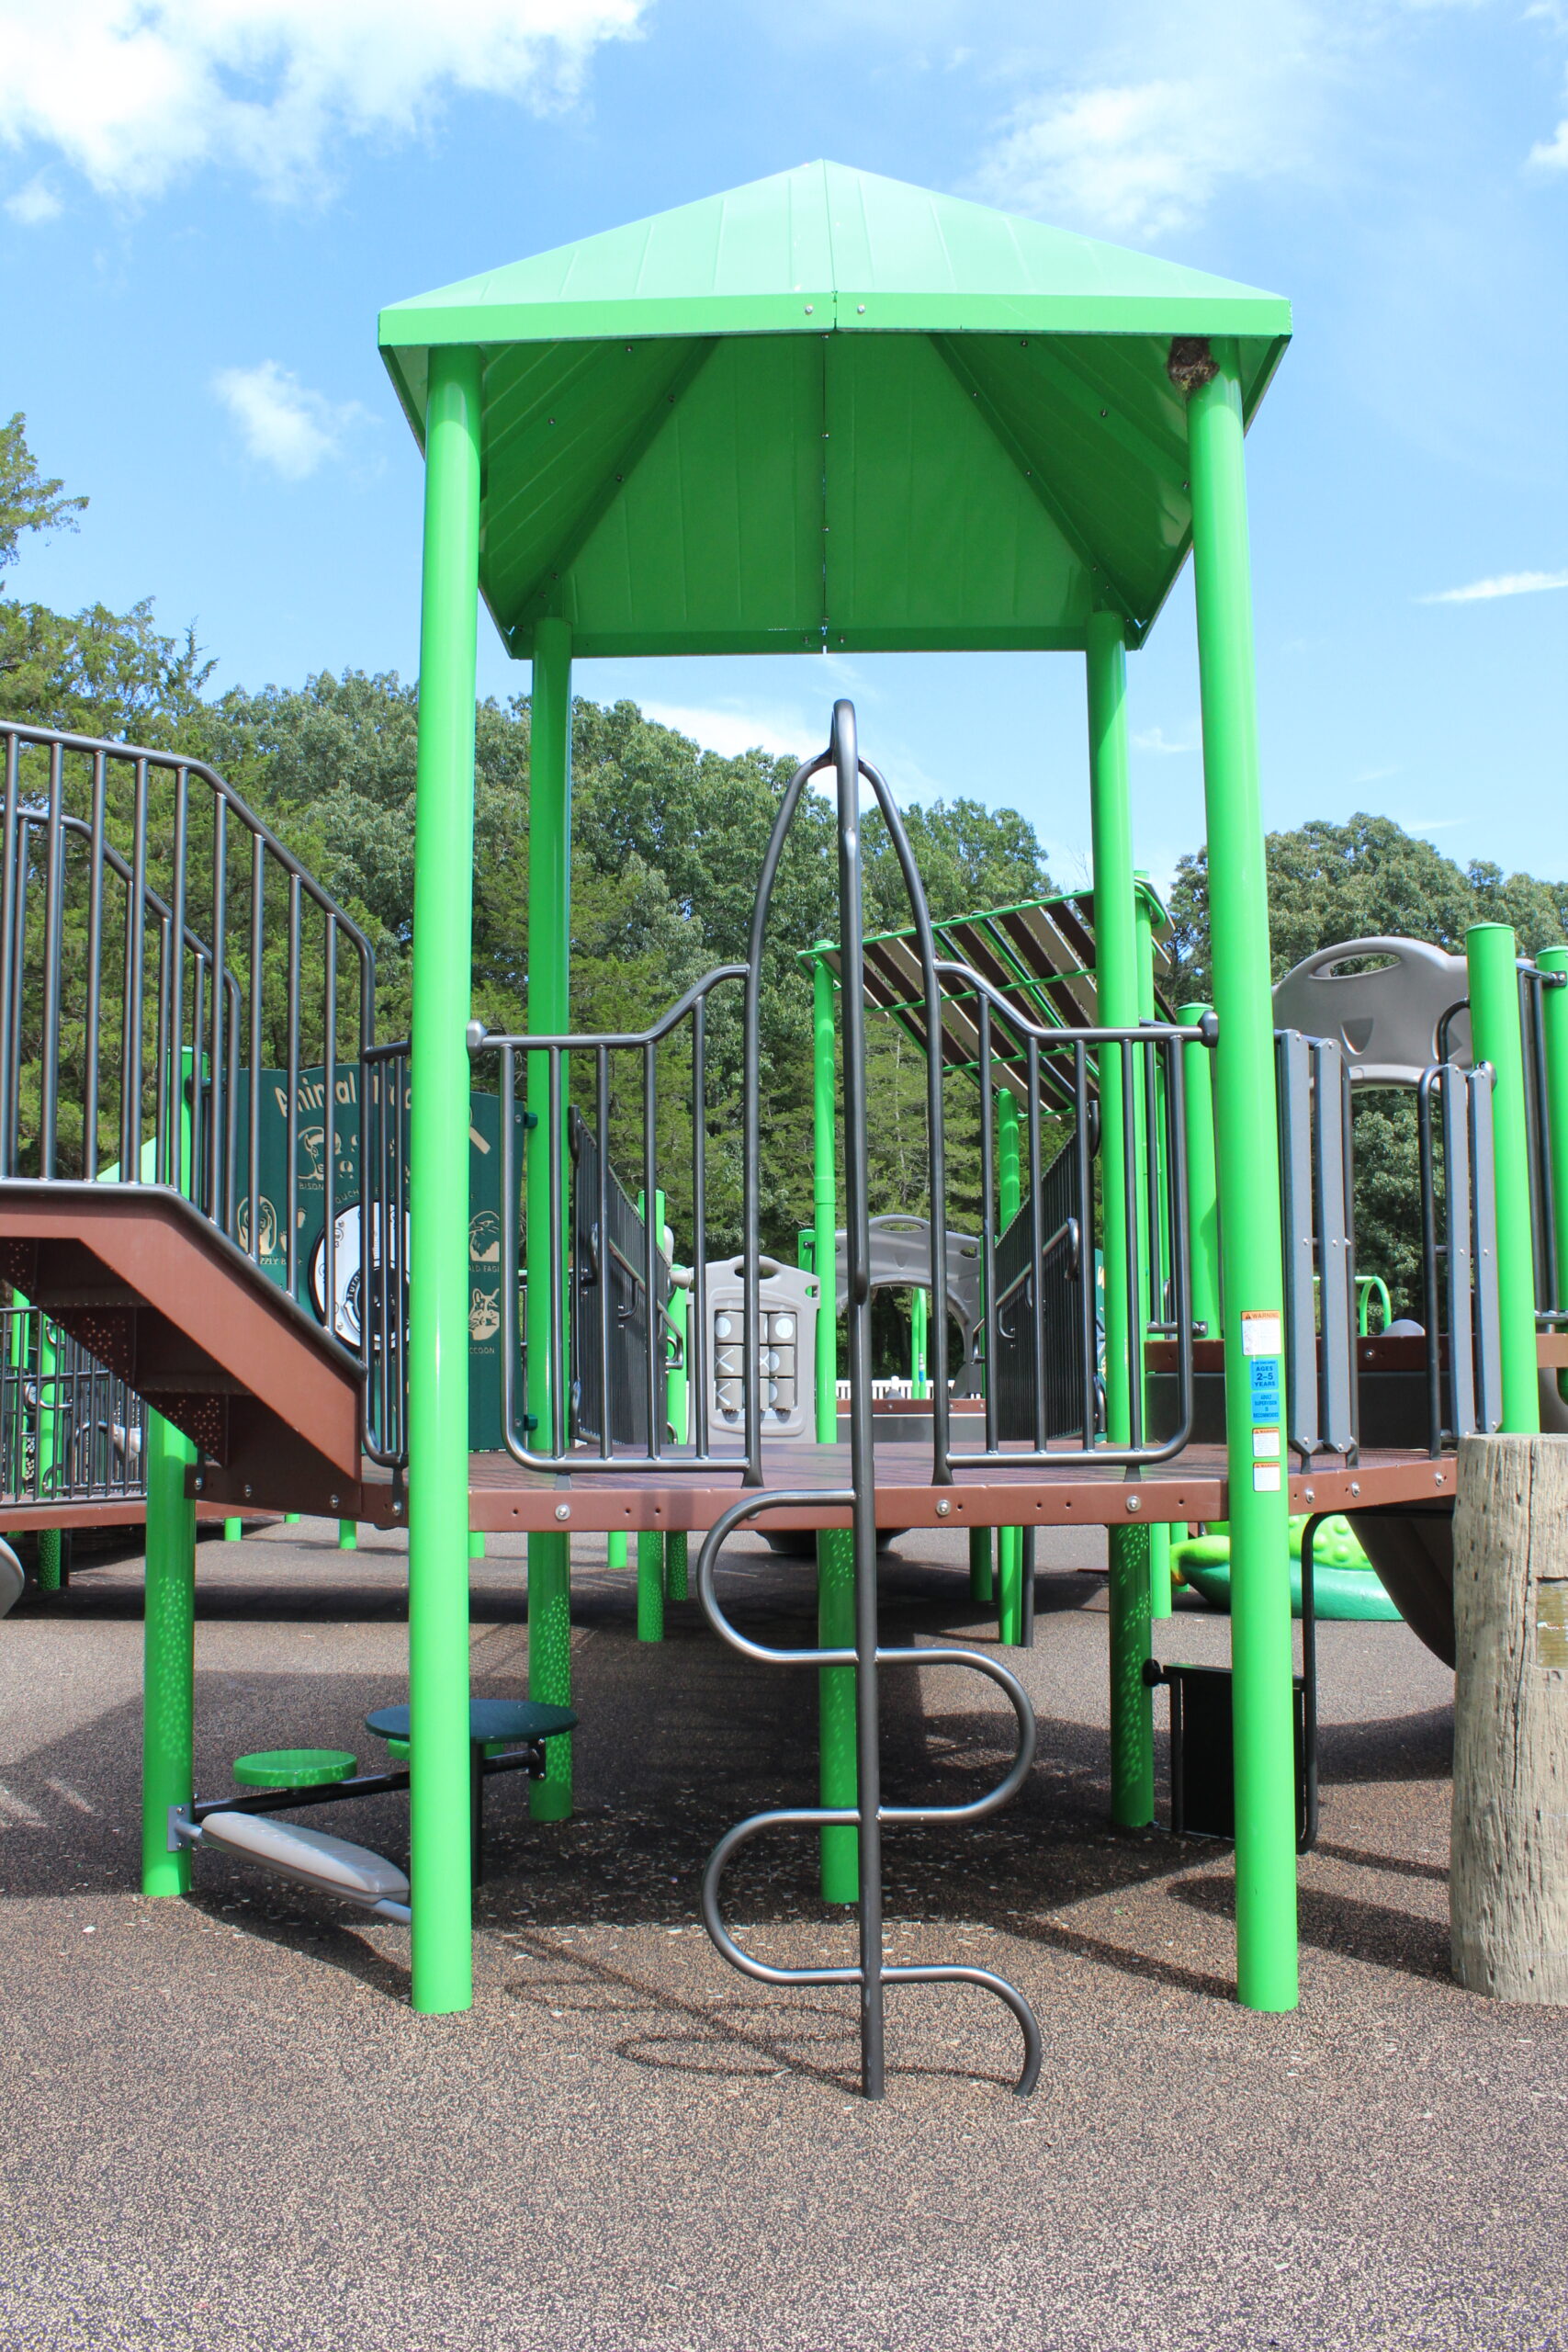 Front Estell Manor Park Playgrounds in Mays Landing NJ - Features - New climbing ladder with SHADY awning on NEW playground structure TALL image